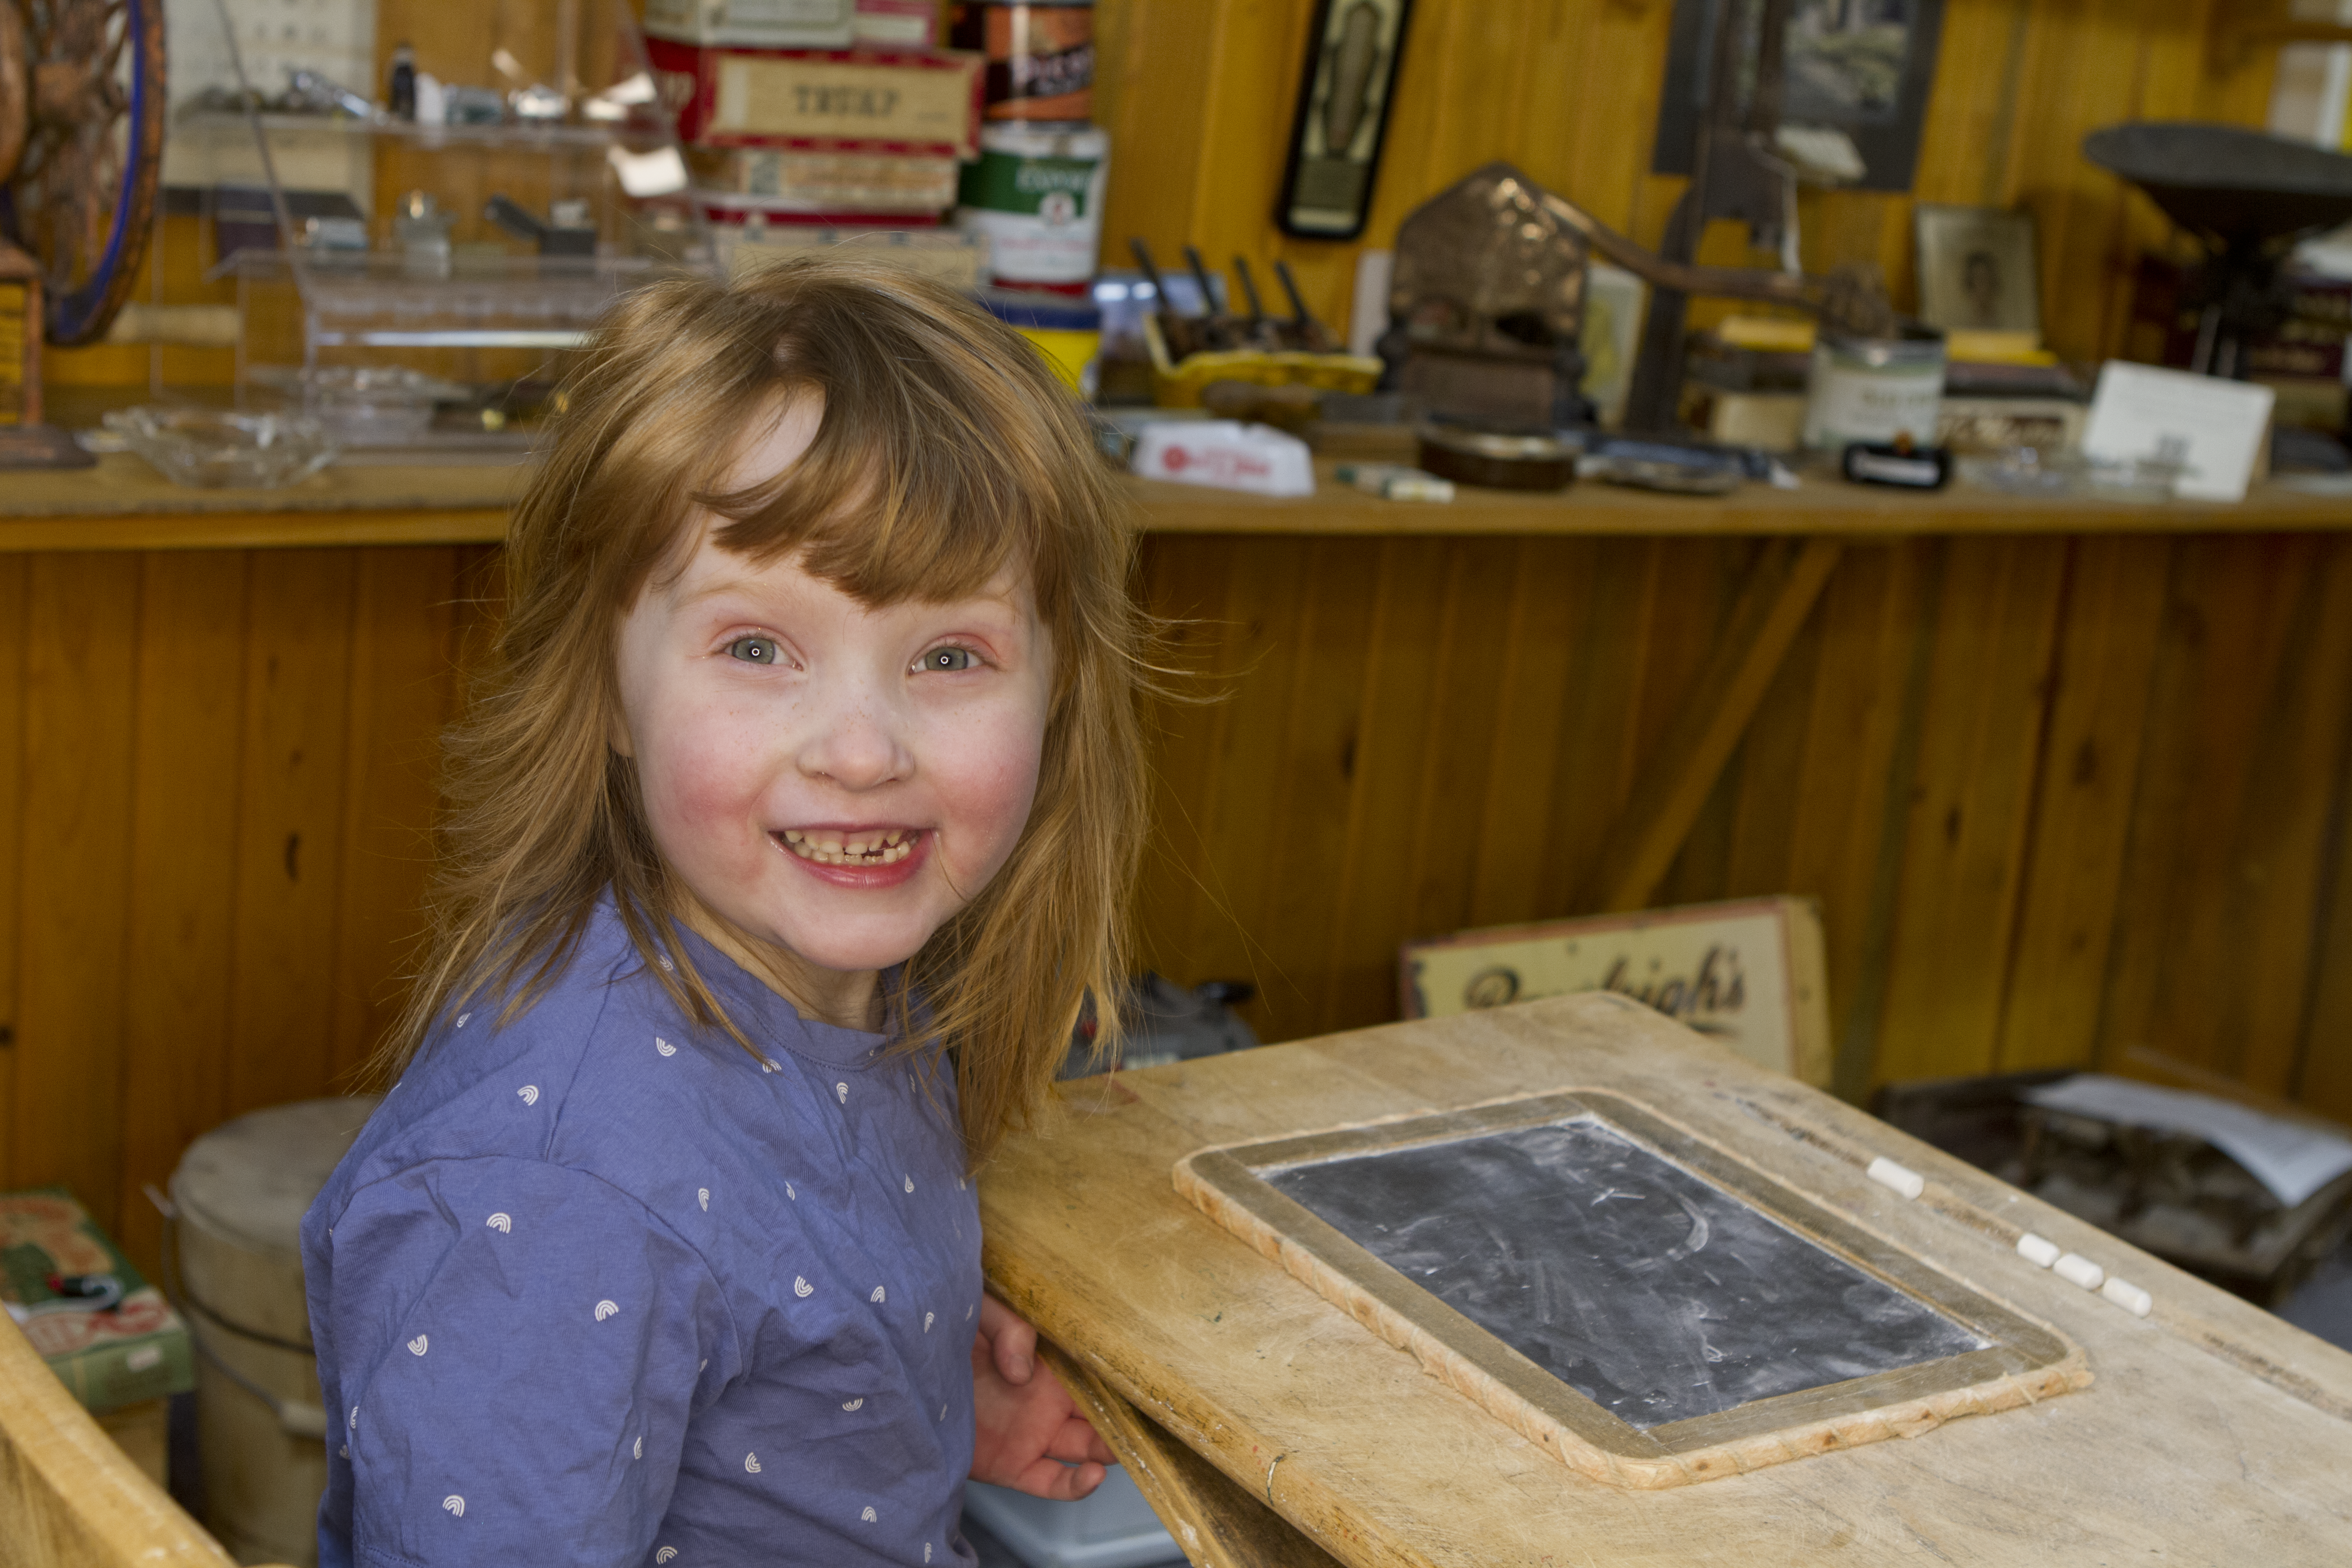 Young Girl Smiling at a Desk in the Museum